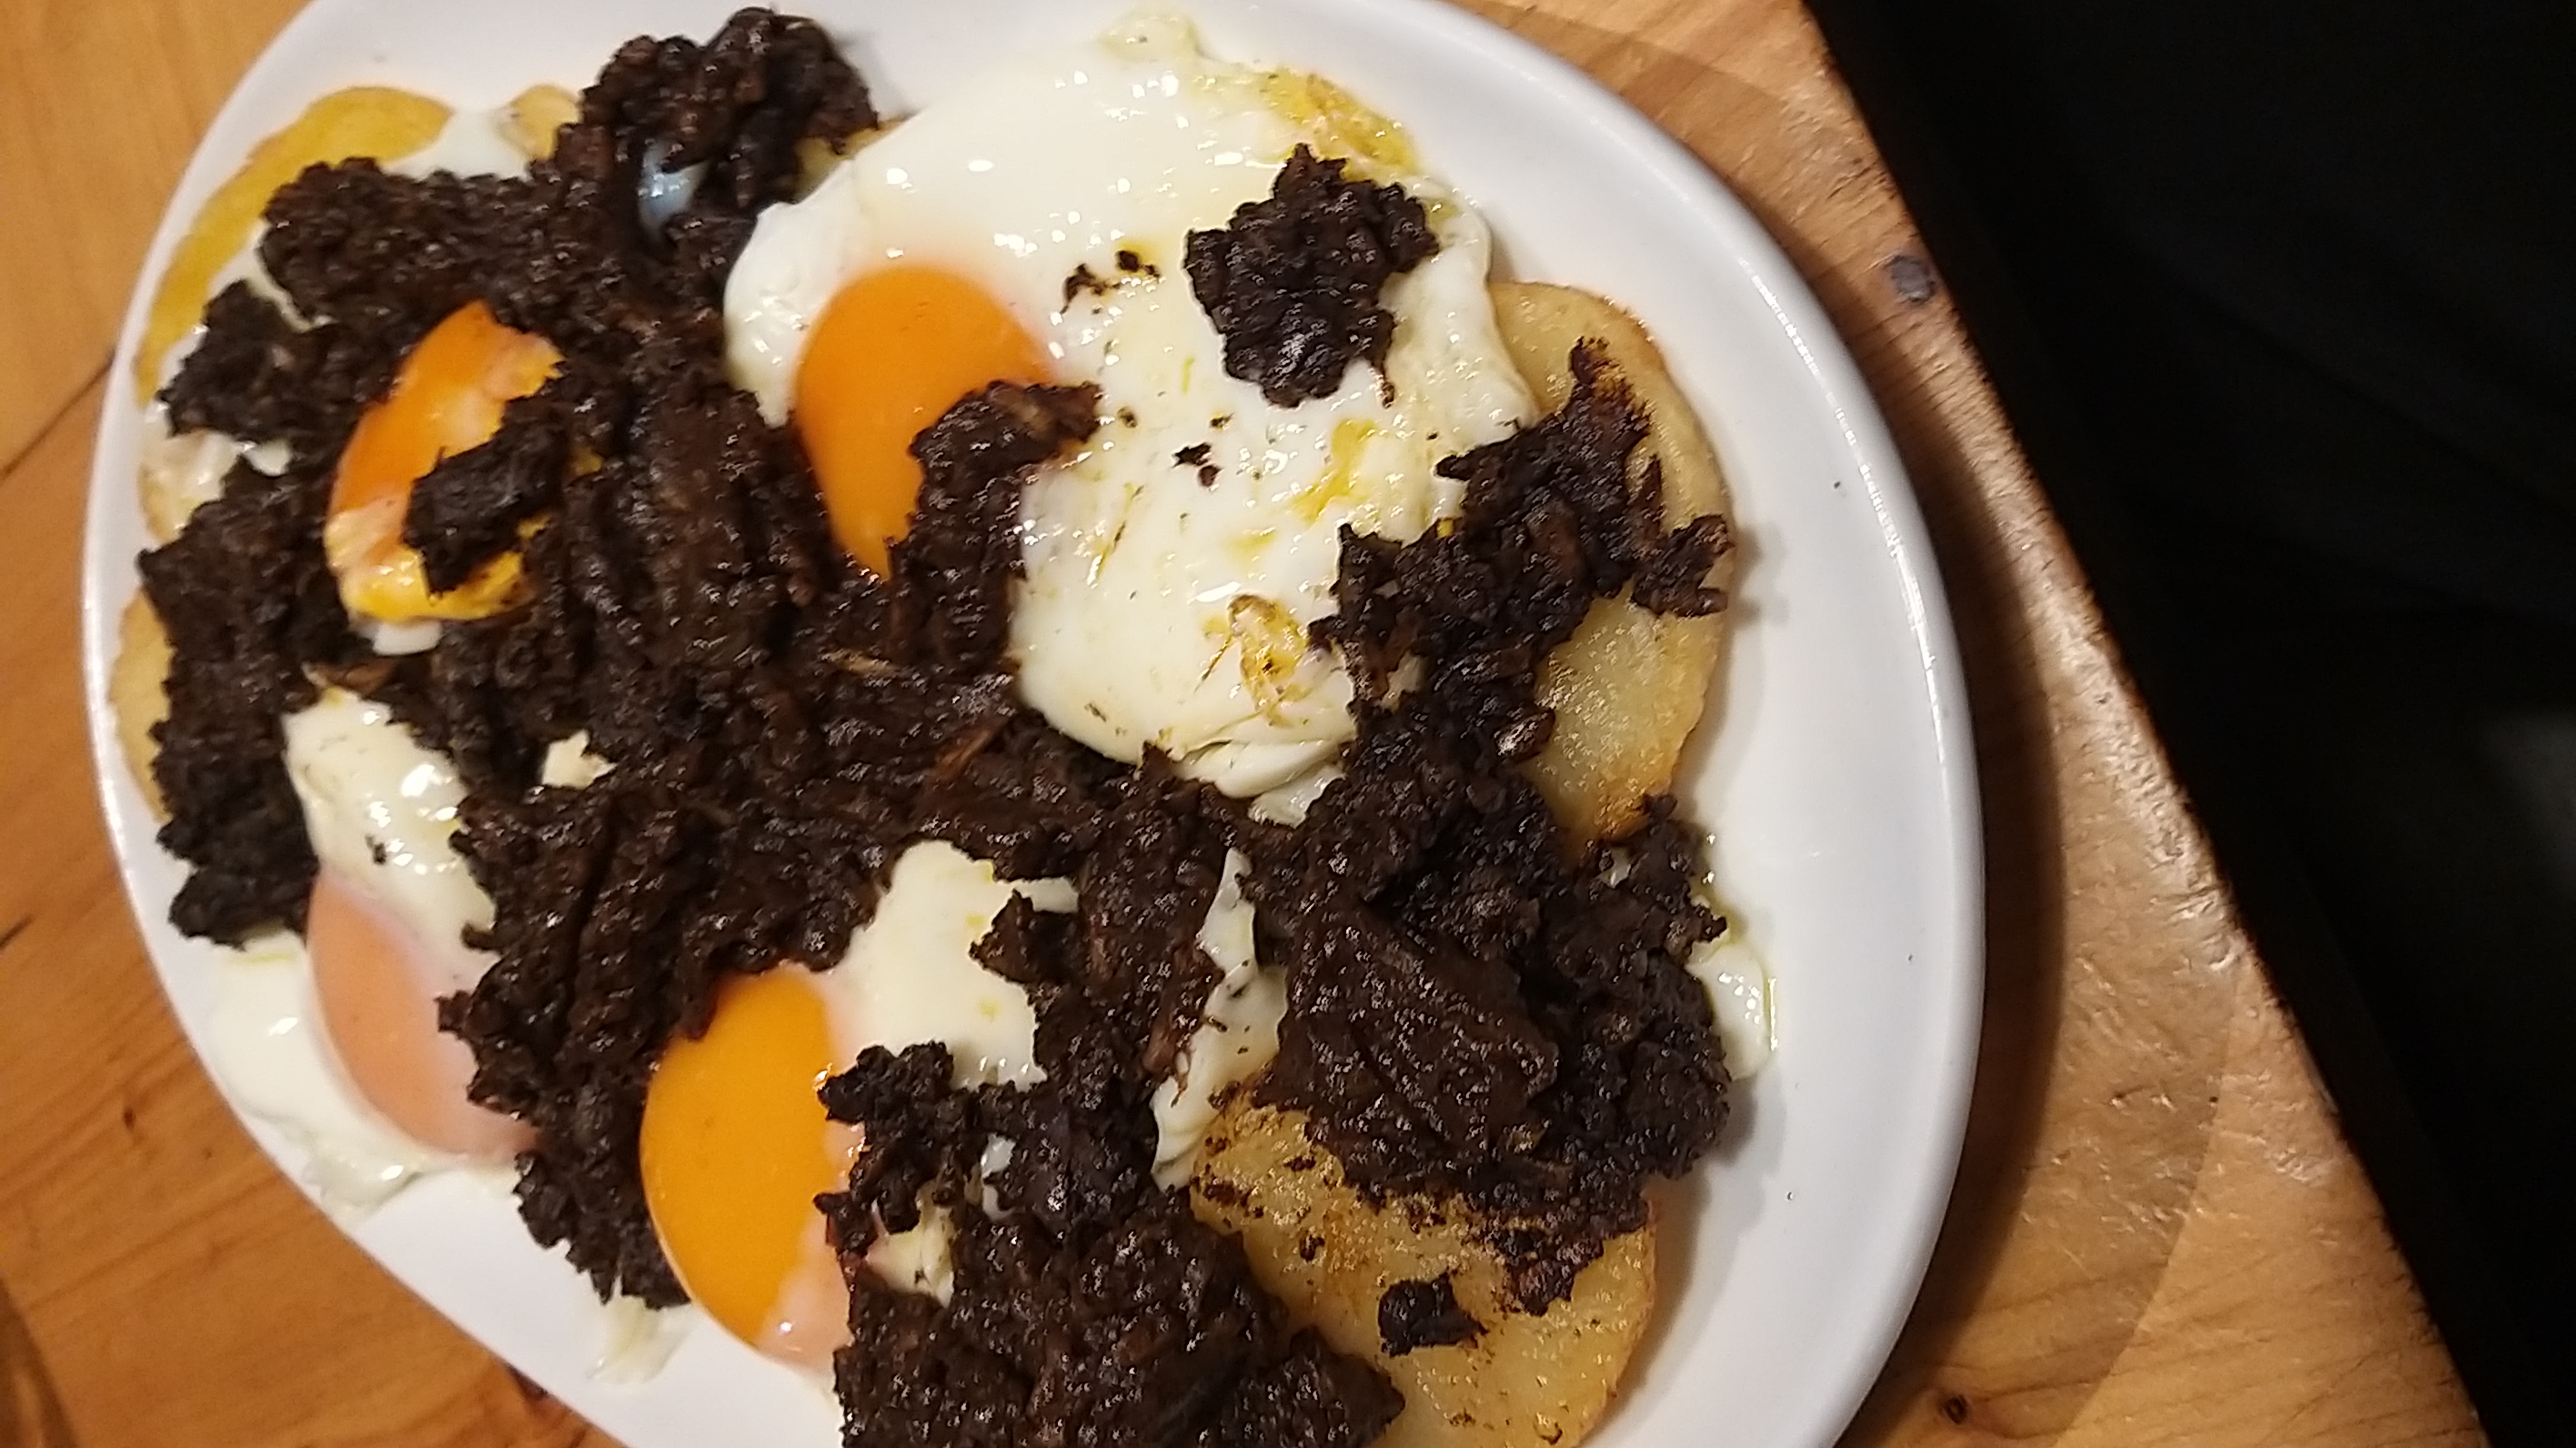 Scrambled eggs with black pudding from León,